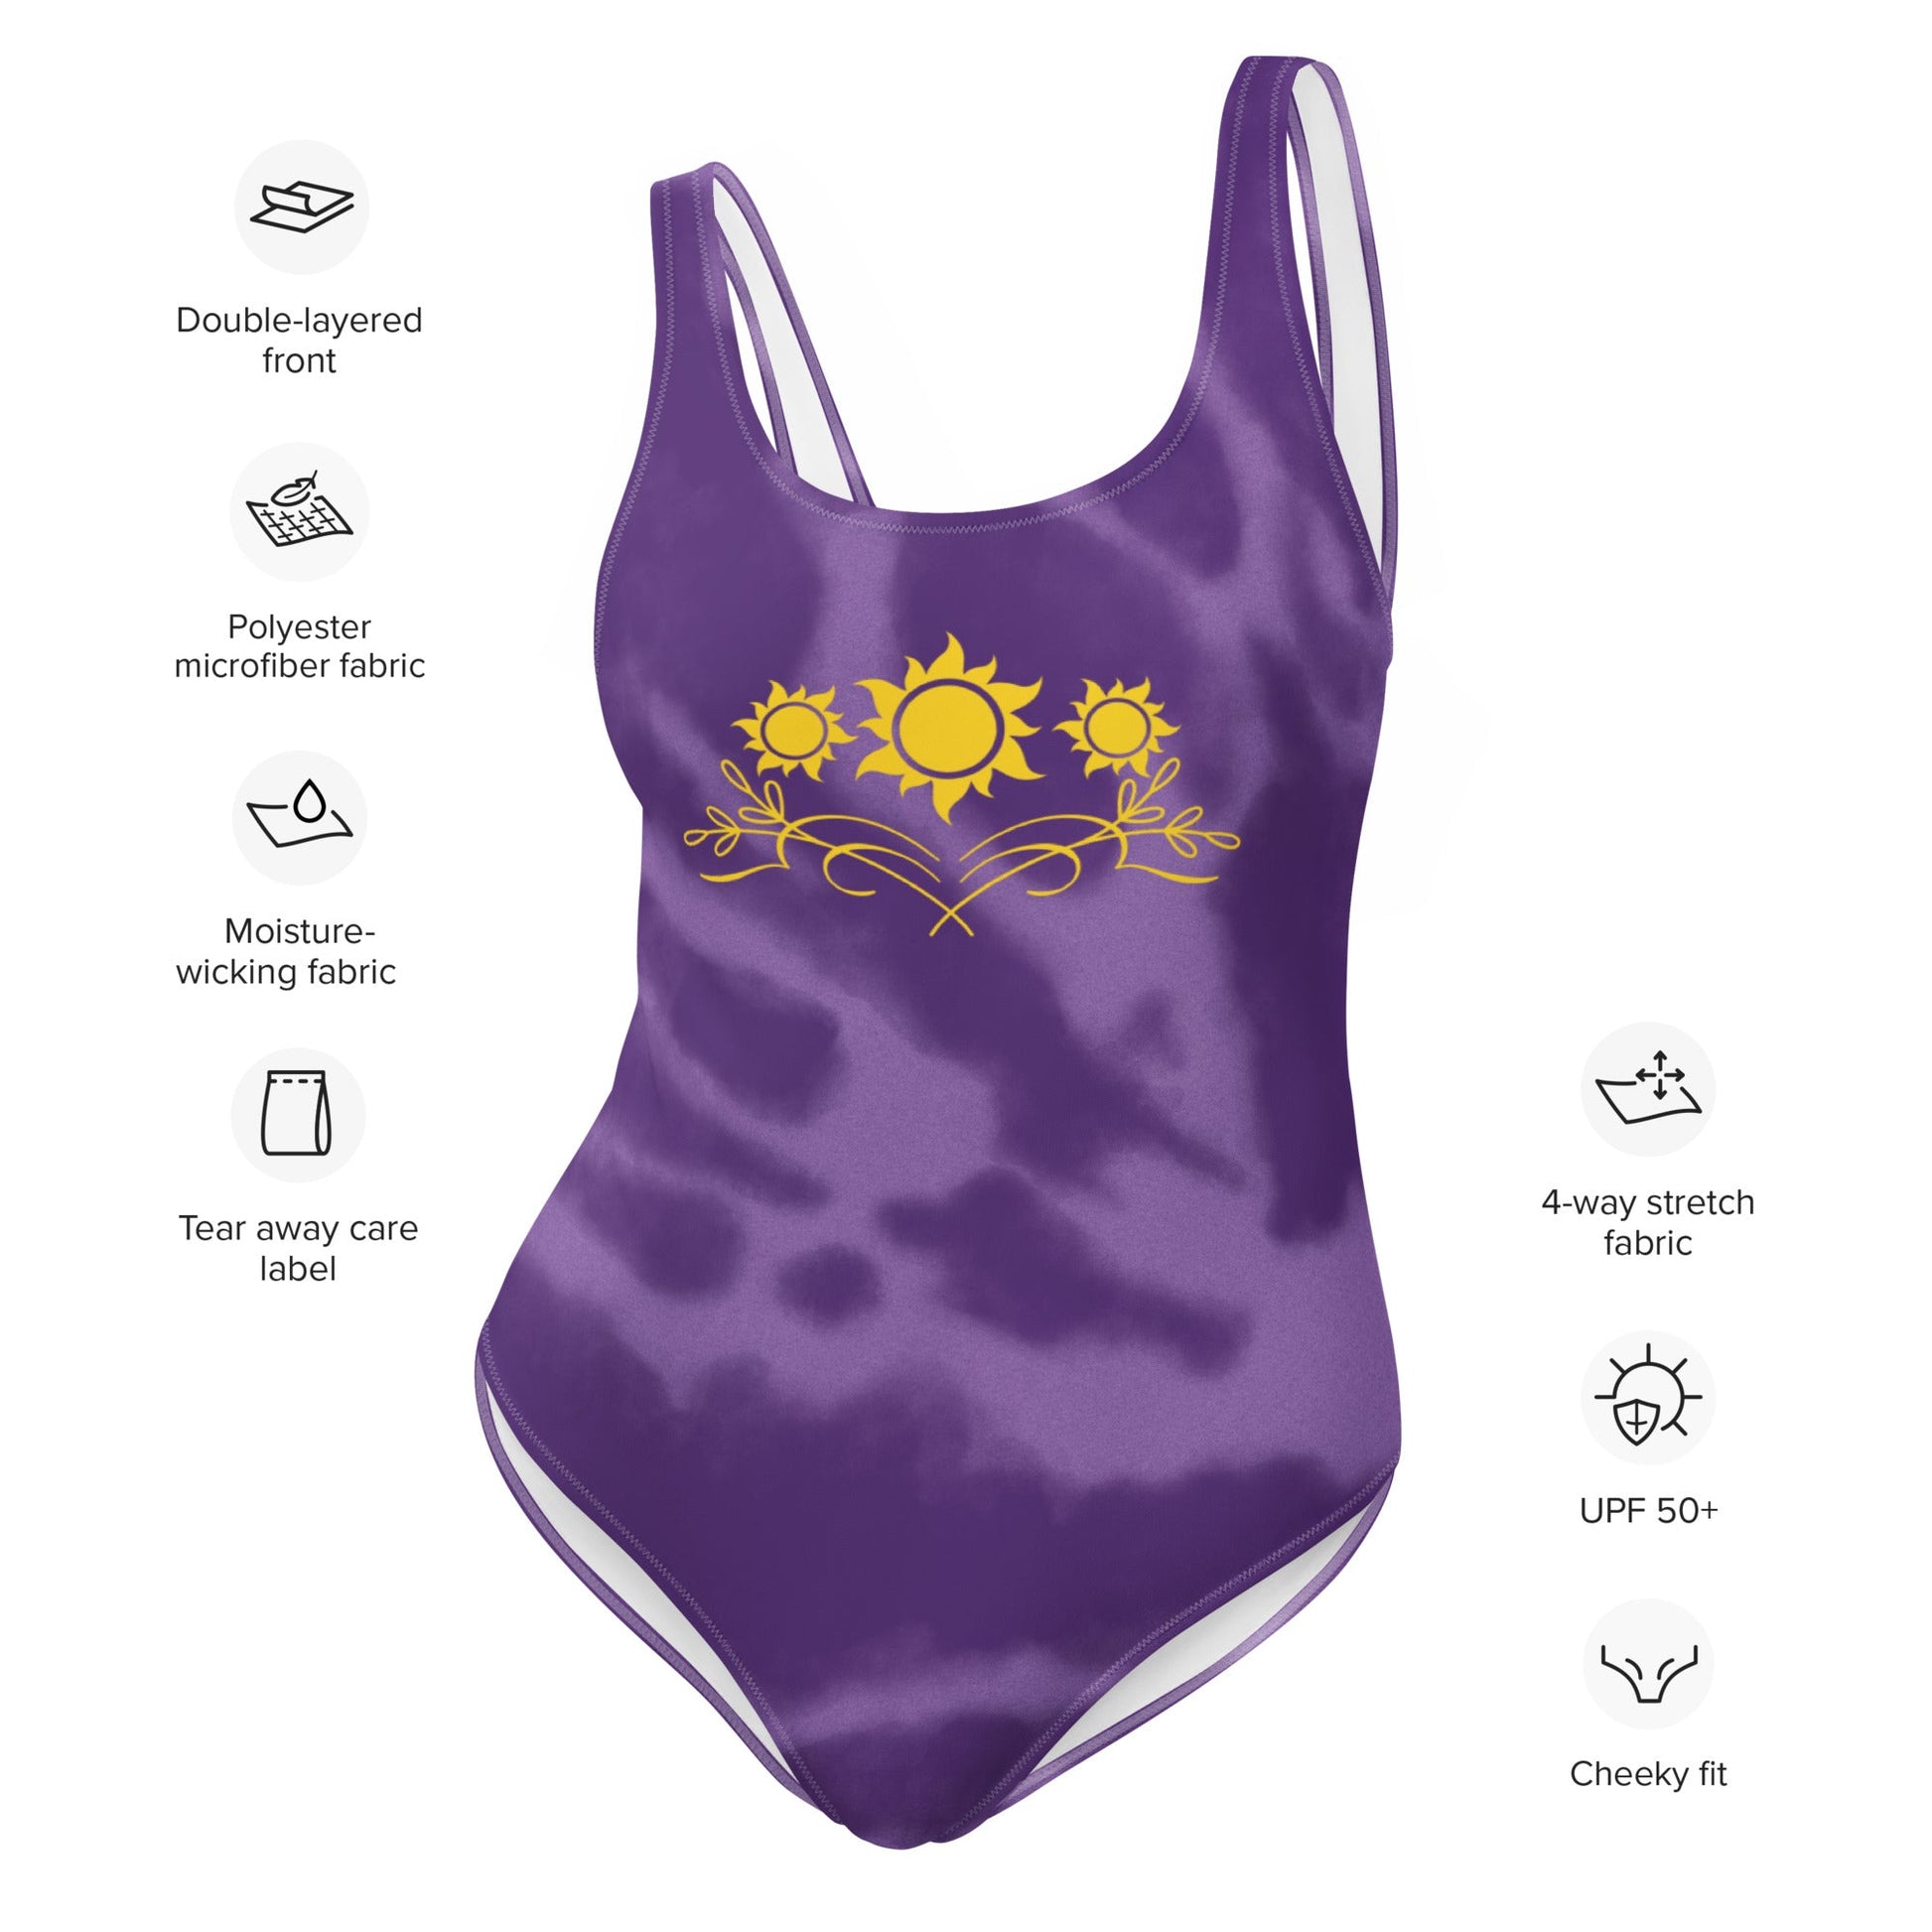 Rapunzel Suns One-Piece Swimsuit adult princesscruise styleWrong Lever Clothing